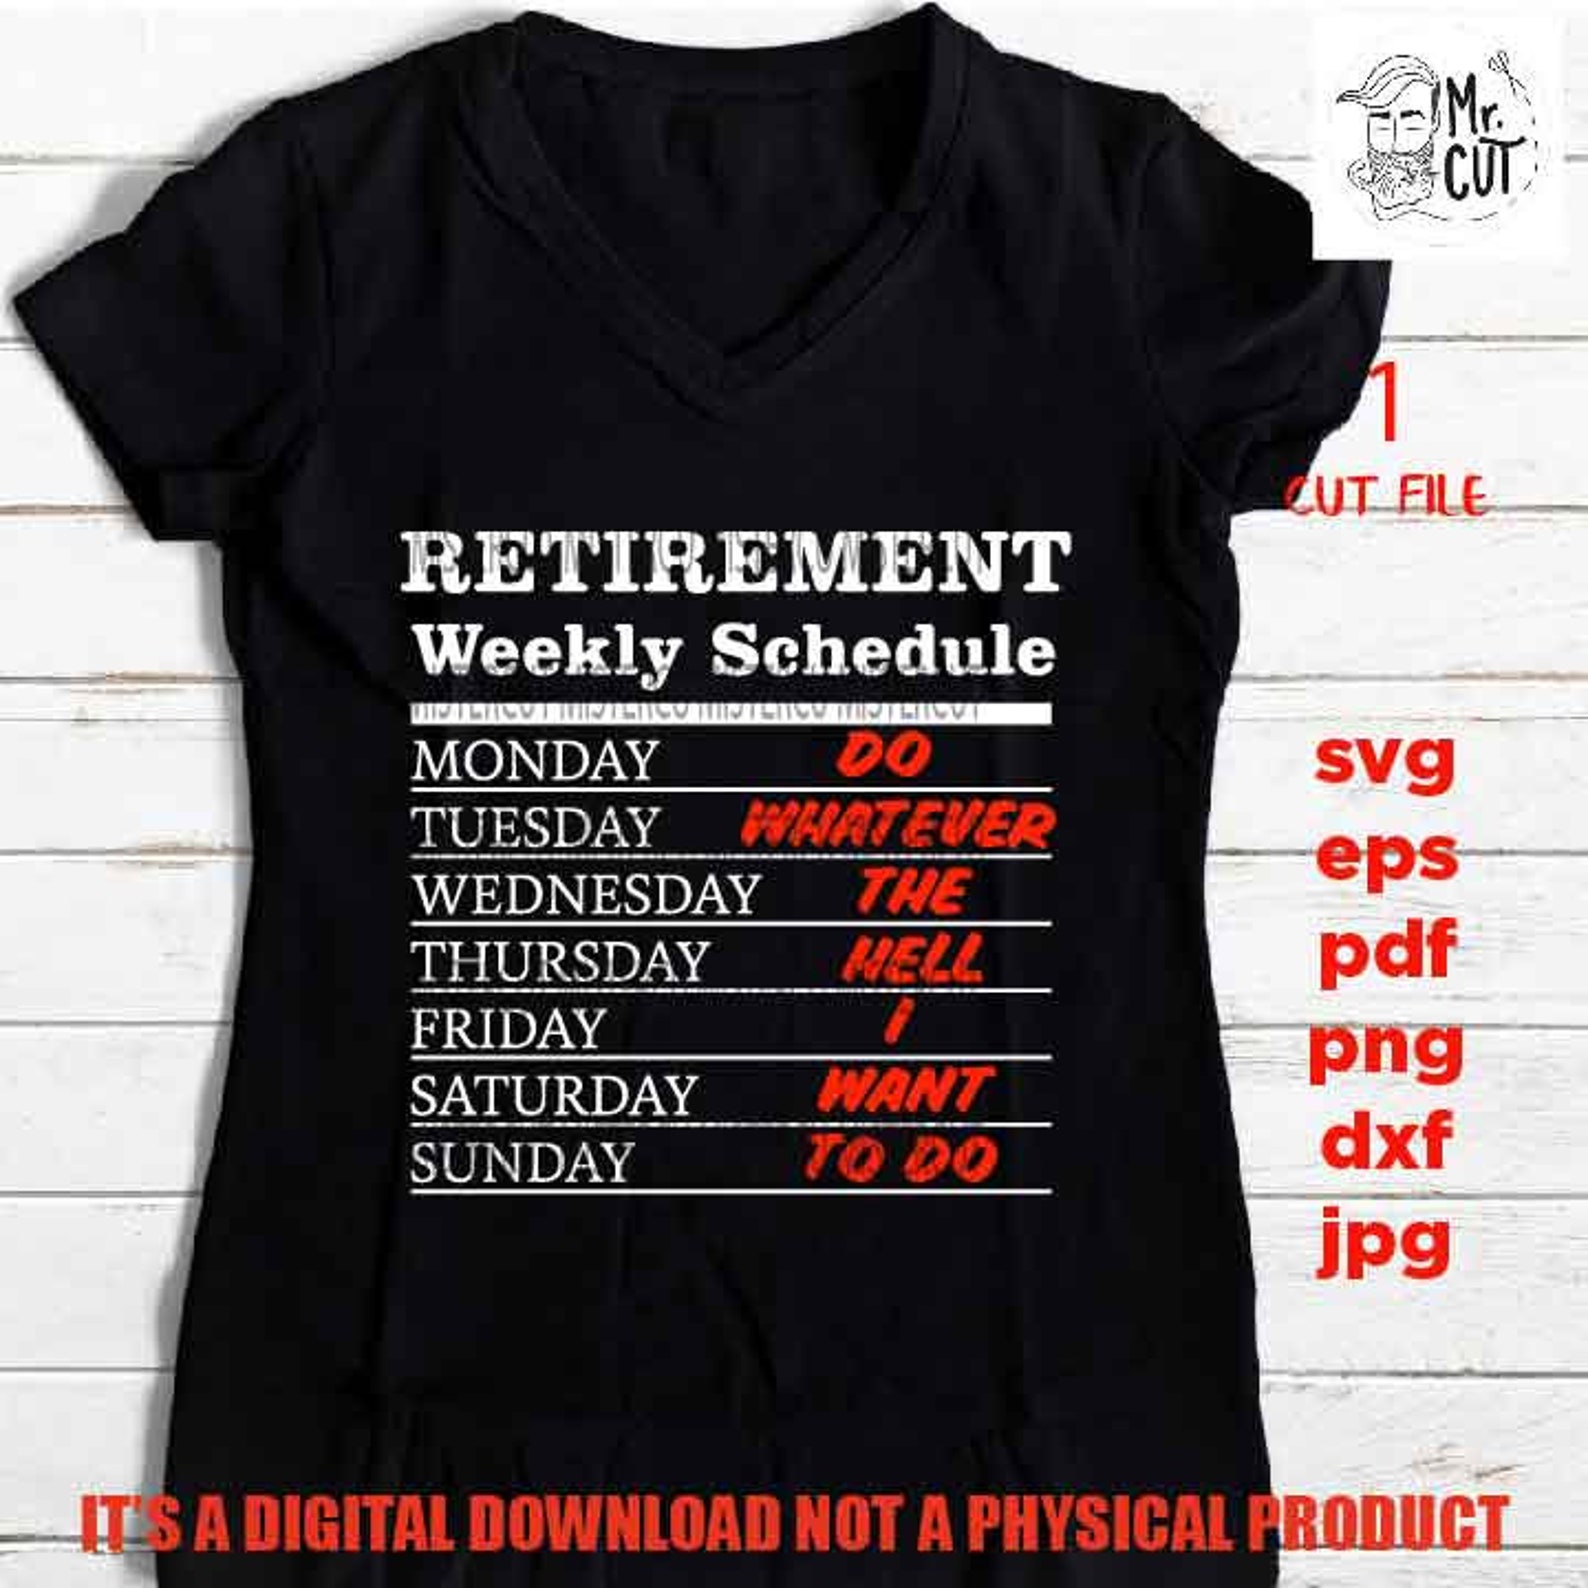 Retirement weekly schedule svg dxf jpg png high resolution | Etsy